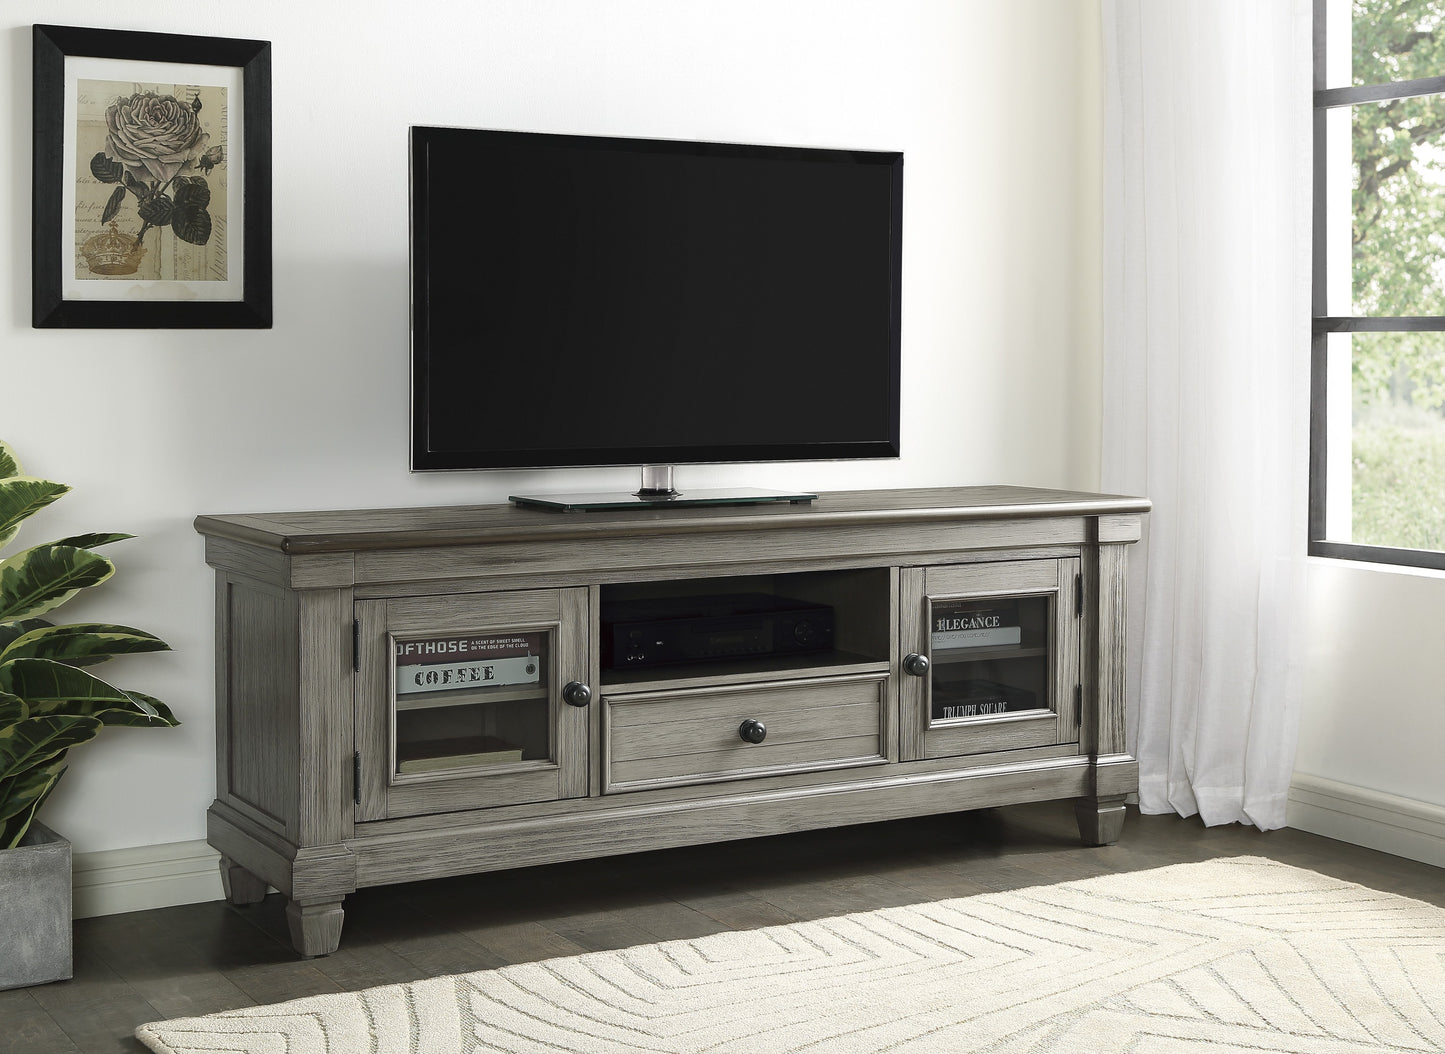 Granby 64" TV Stand GREY